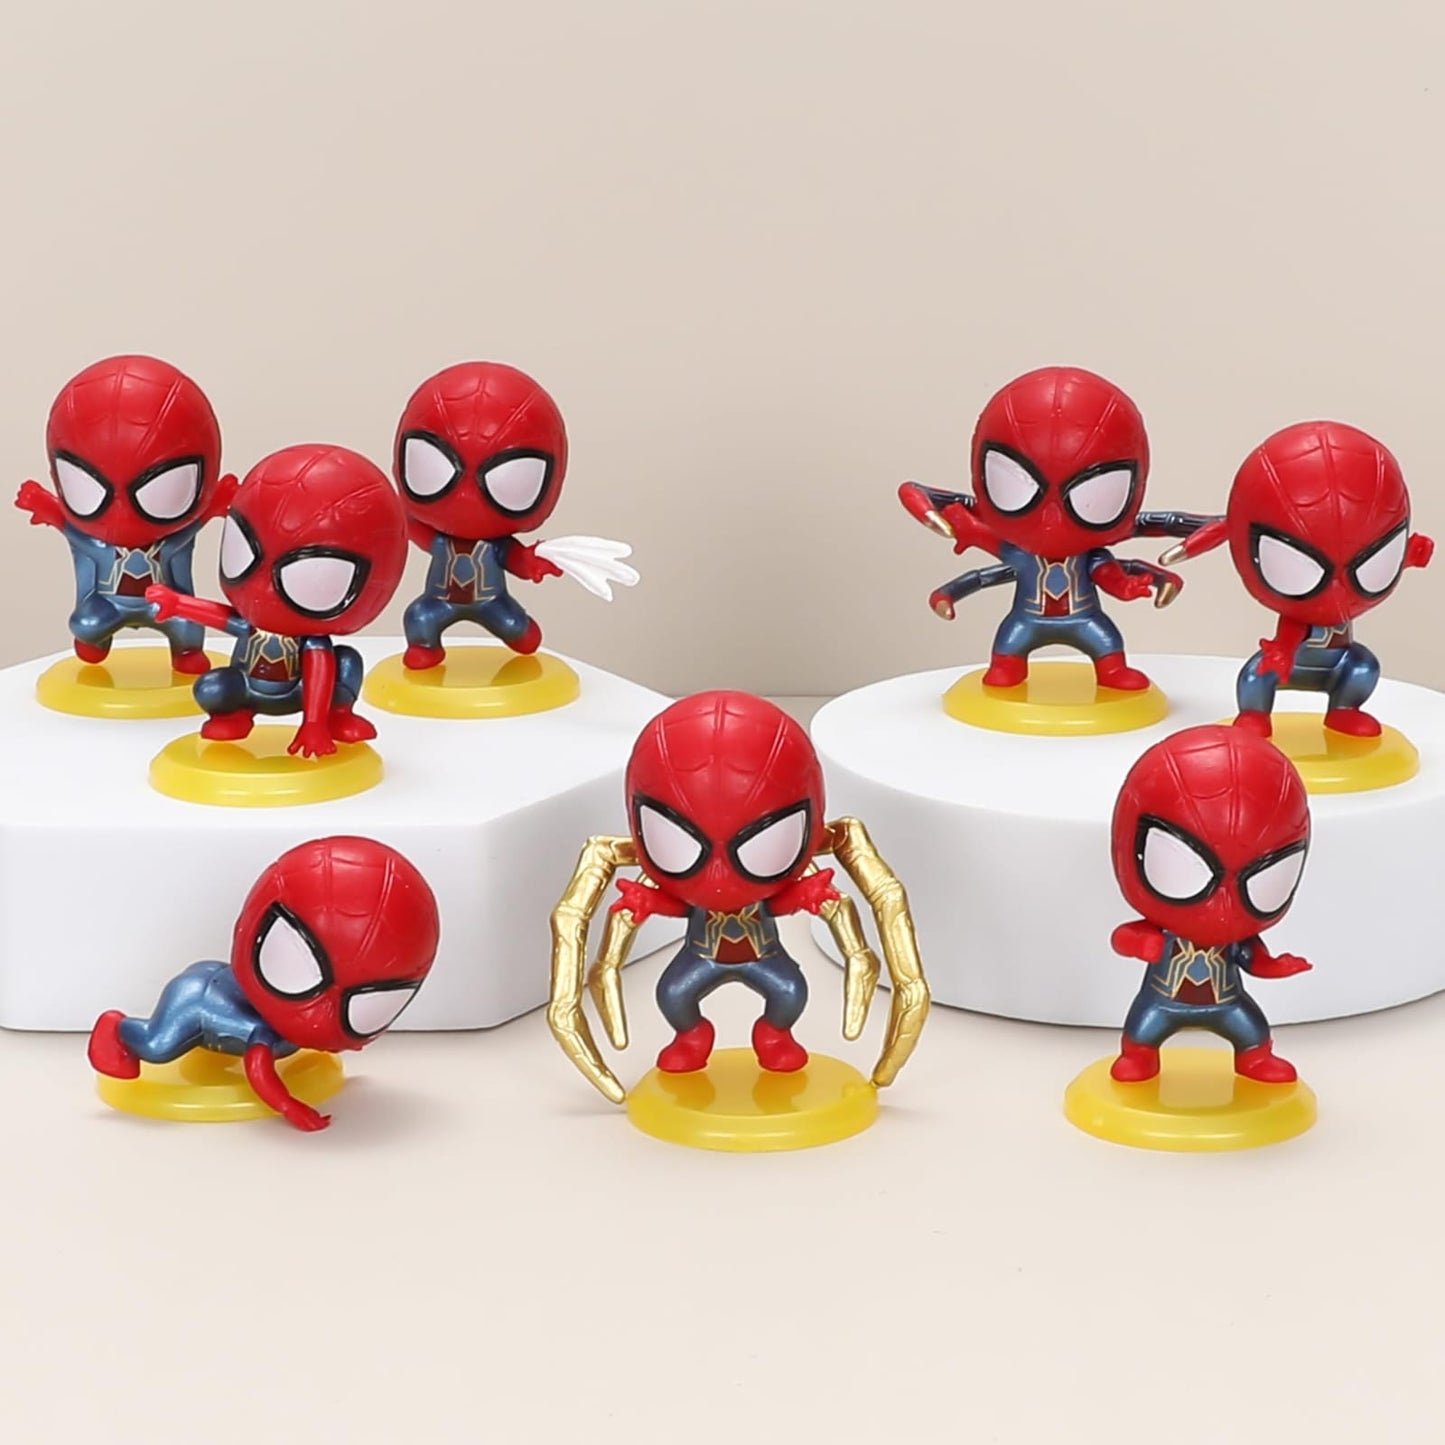 Cute Mini Spiderman Action Figures (Set of 8), Premium PVC Anime Collectibles, Cartoon Toy, Cake Topper, Ideal Gift for Kids (4.5 to 5cm)